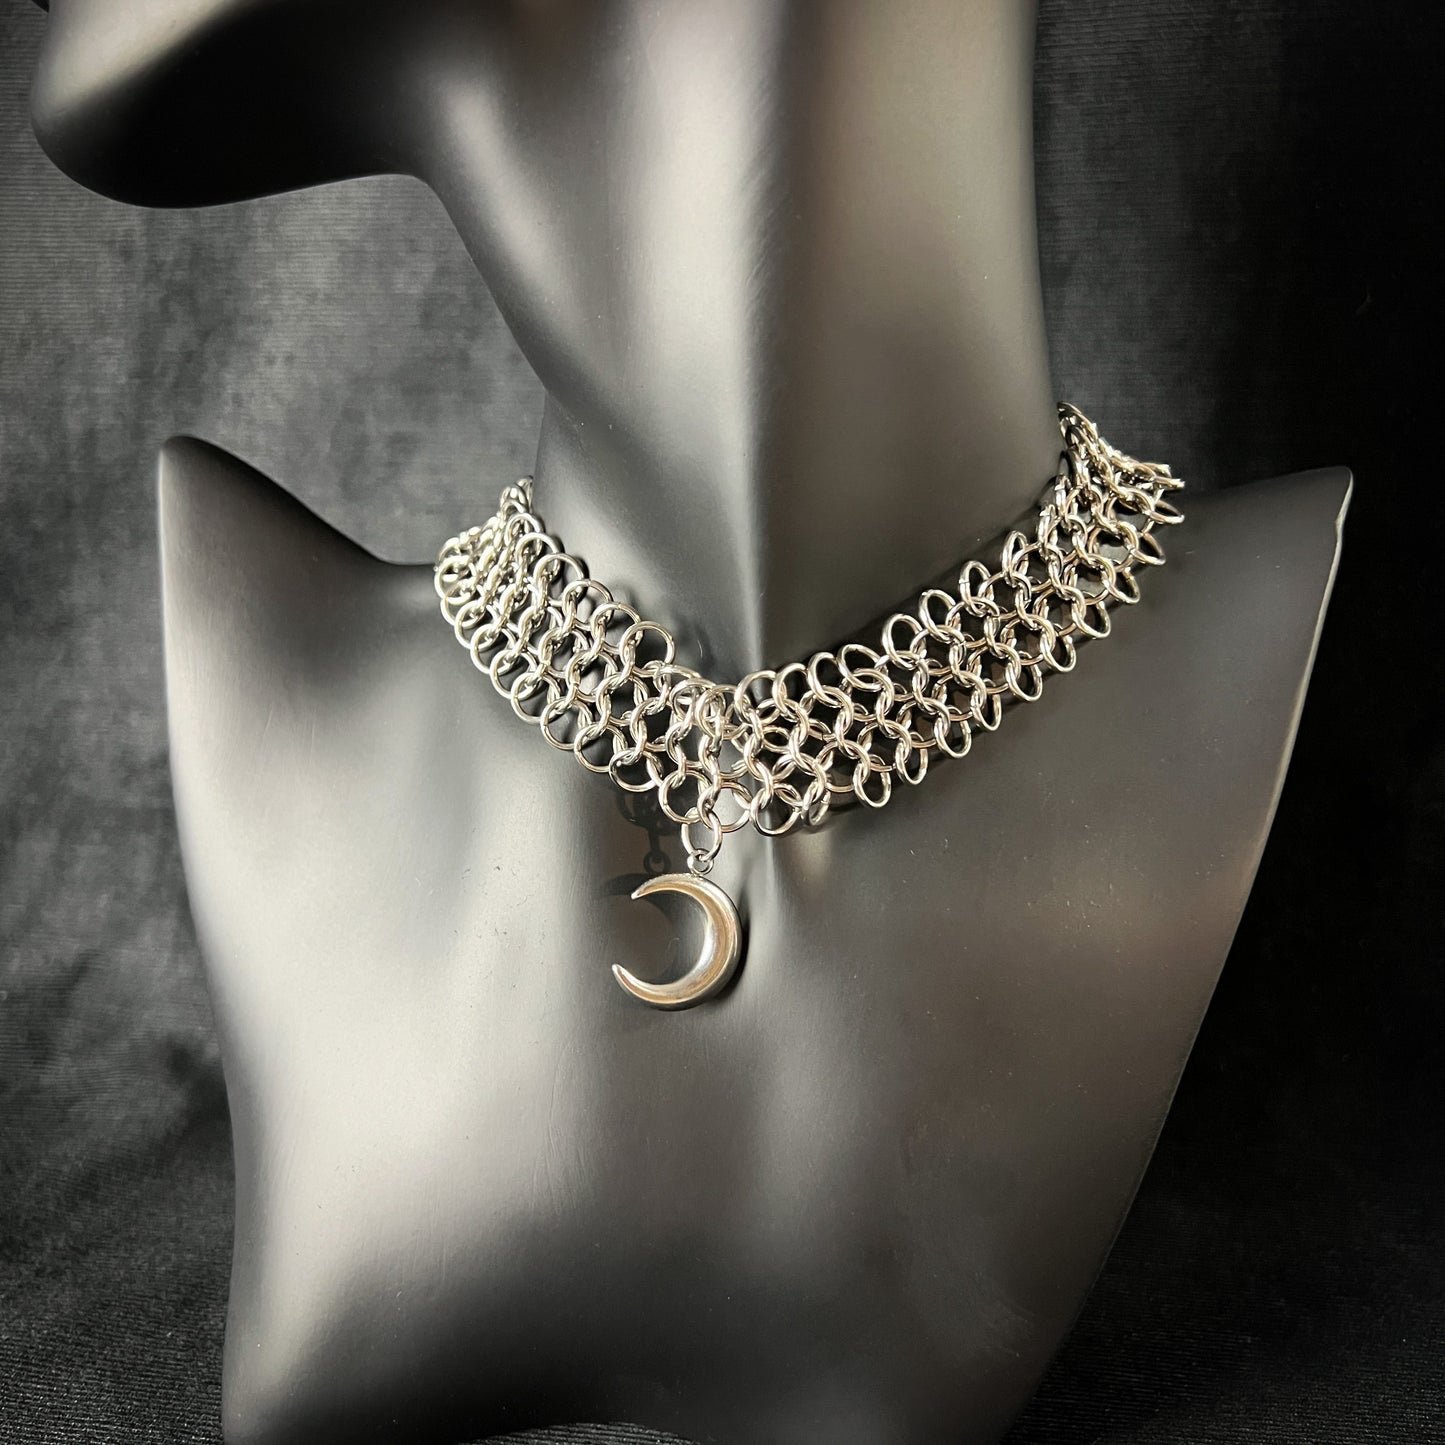 Moon crescent chainmail choker European 4 in 1 stainless steel necklace Baguette Magick